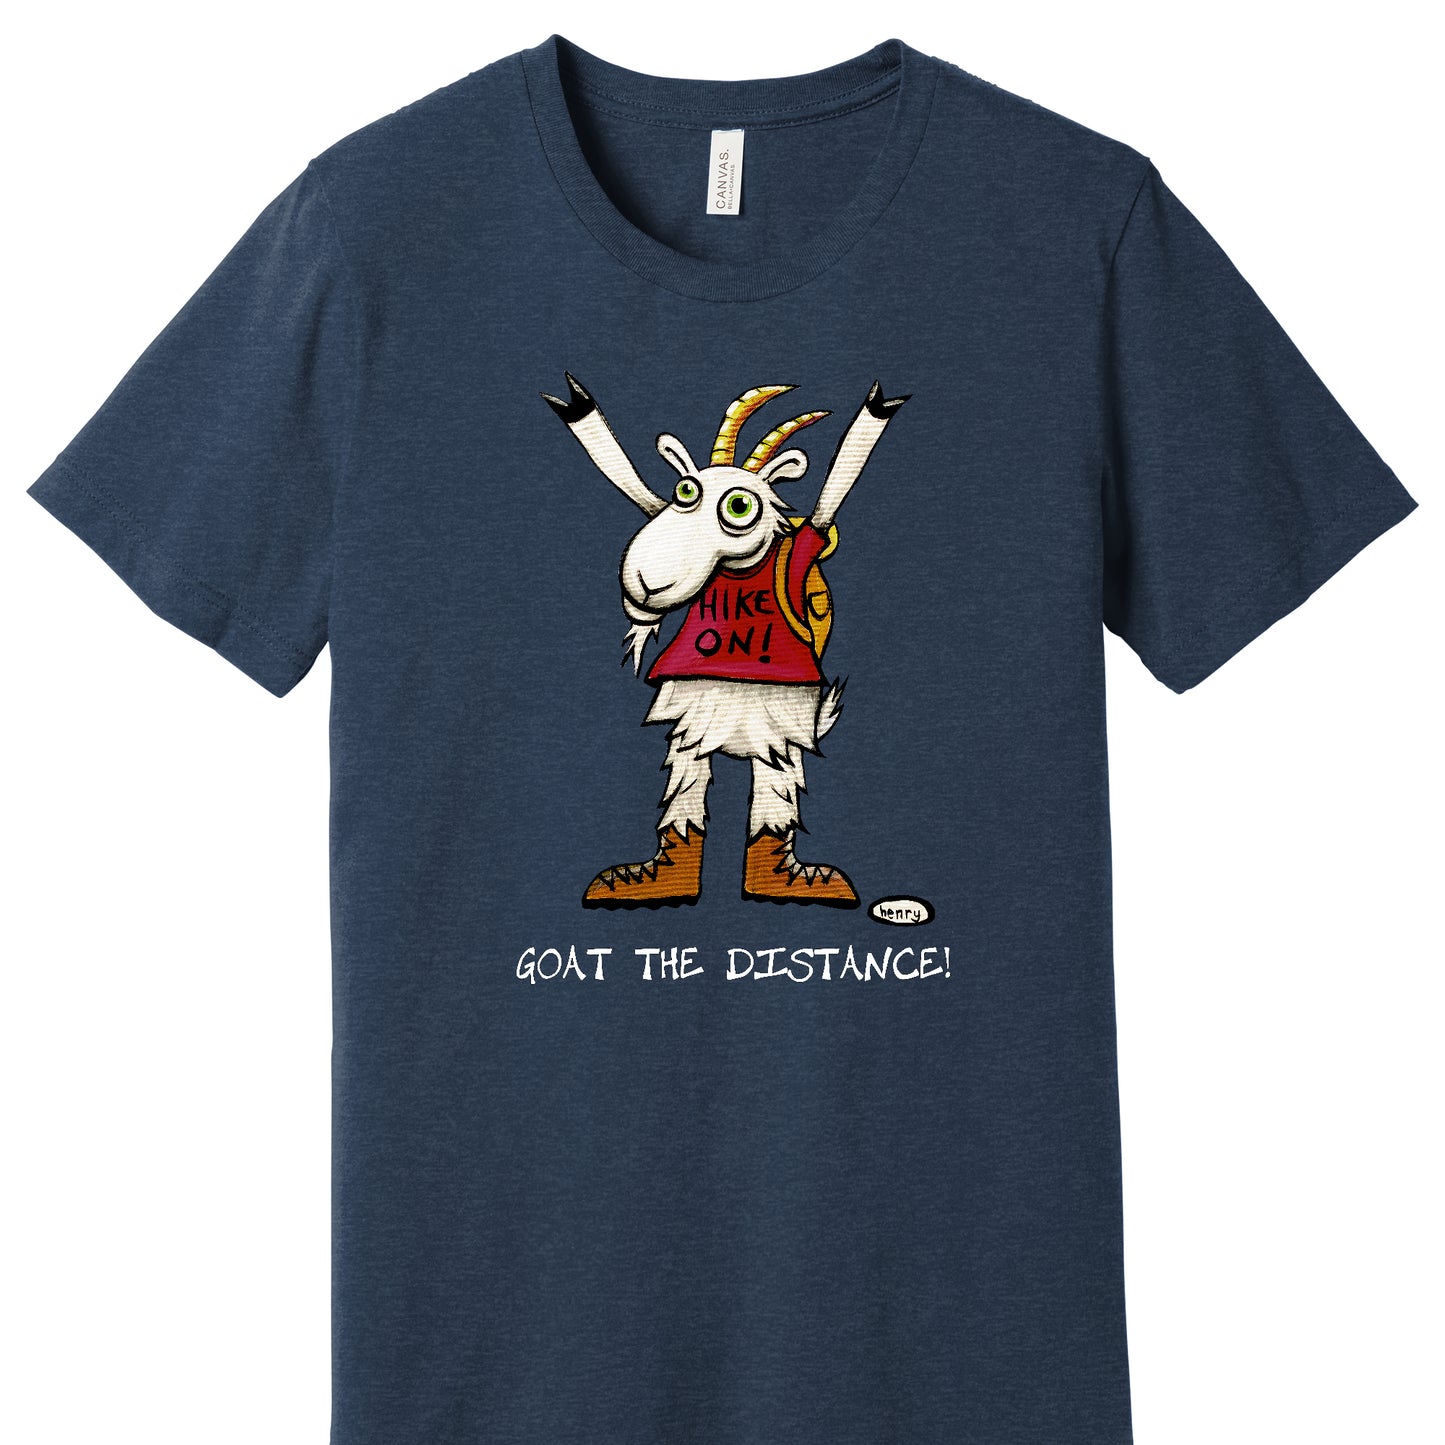 Goat the Distance Adult Unisex Heathered Navy T-Shirt | Wearable Art by Seattle Mural Artist Ryan "Henry" Ward